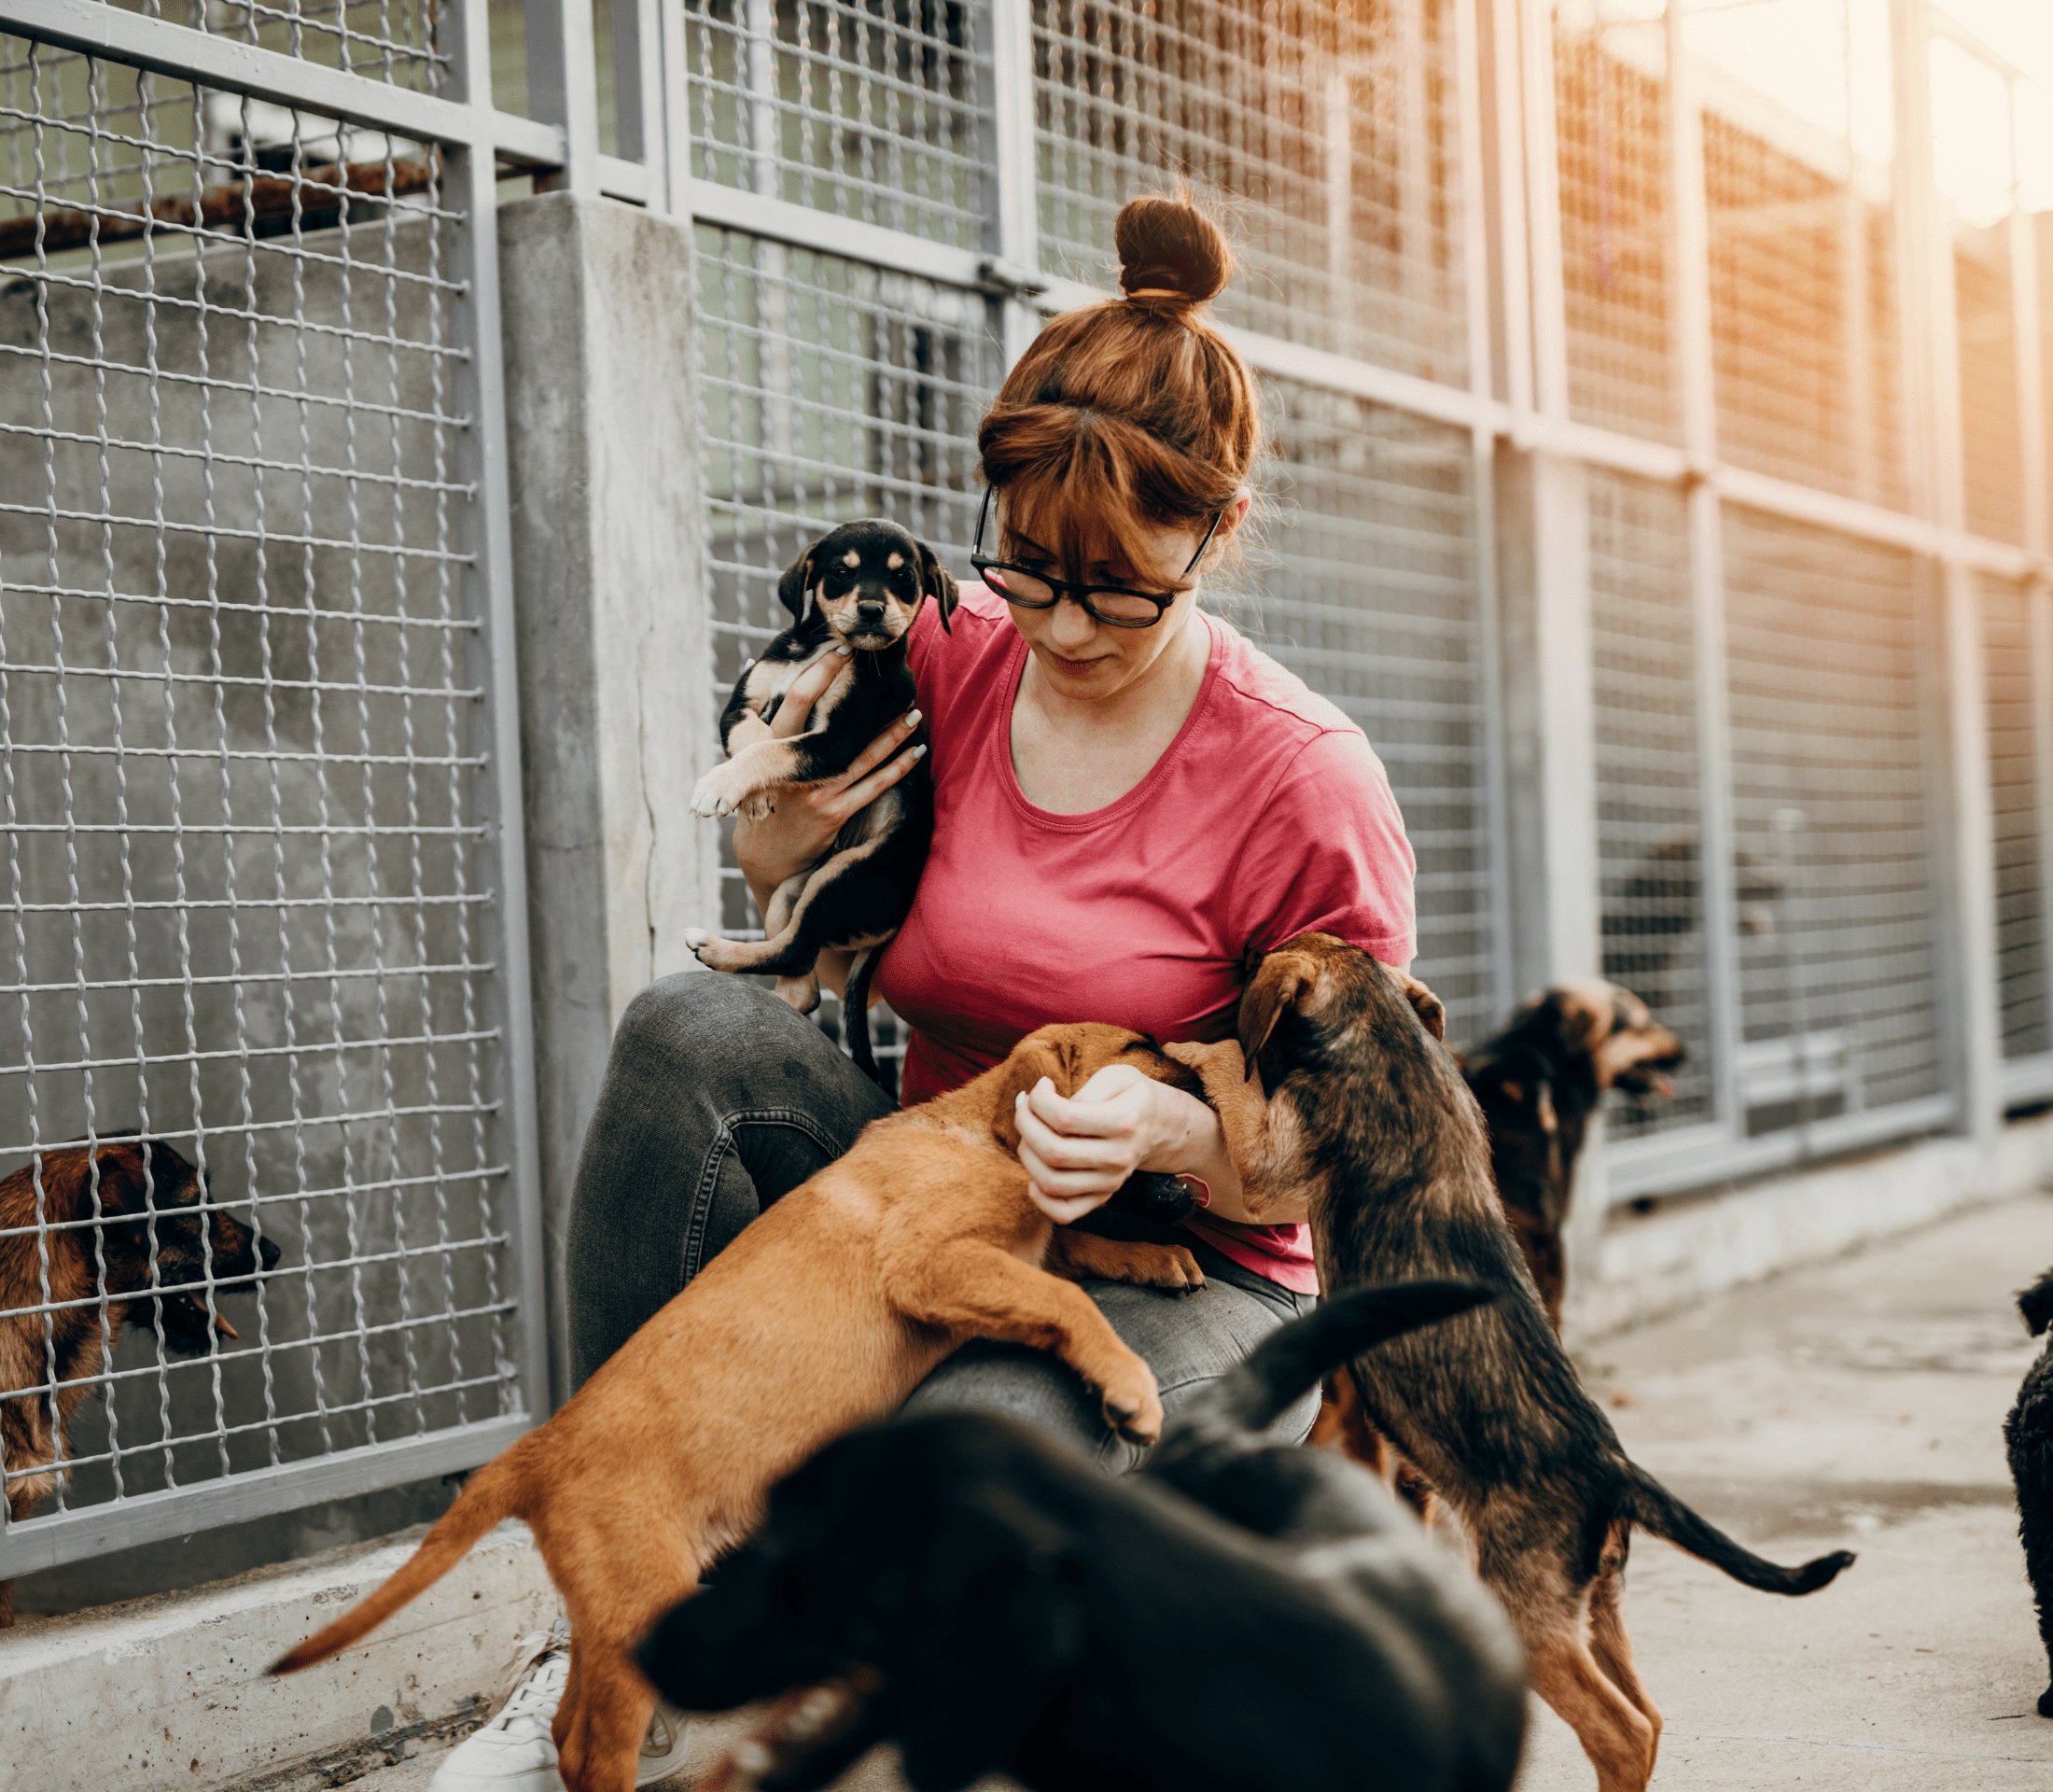 Lady in pink shirt surrounded with shelter dogs